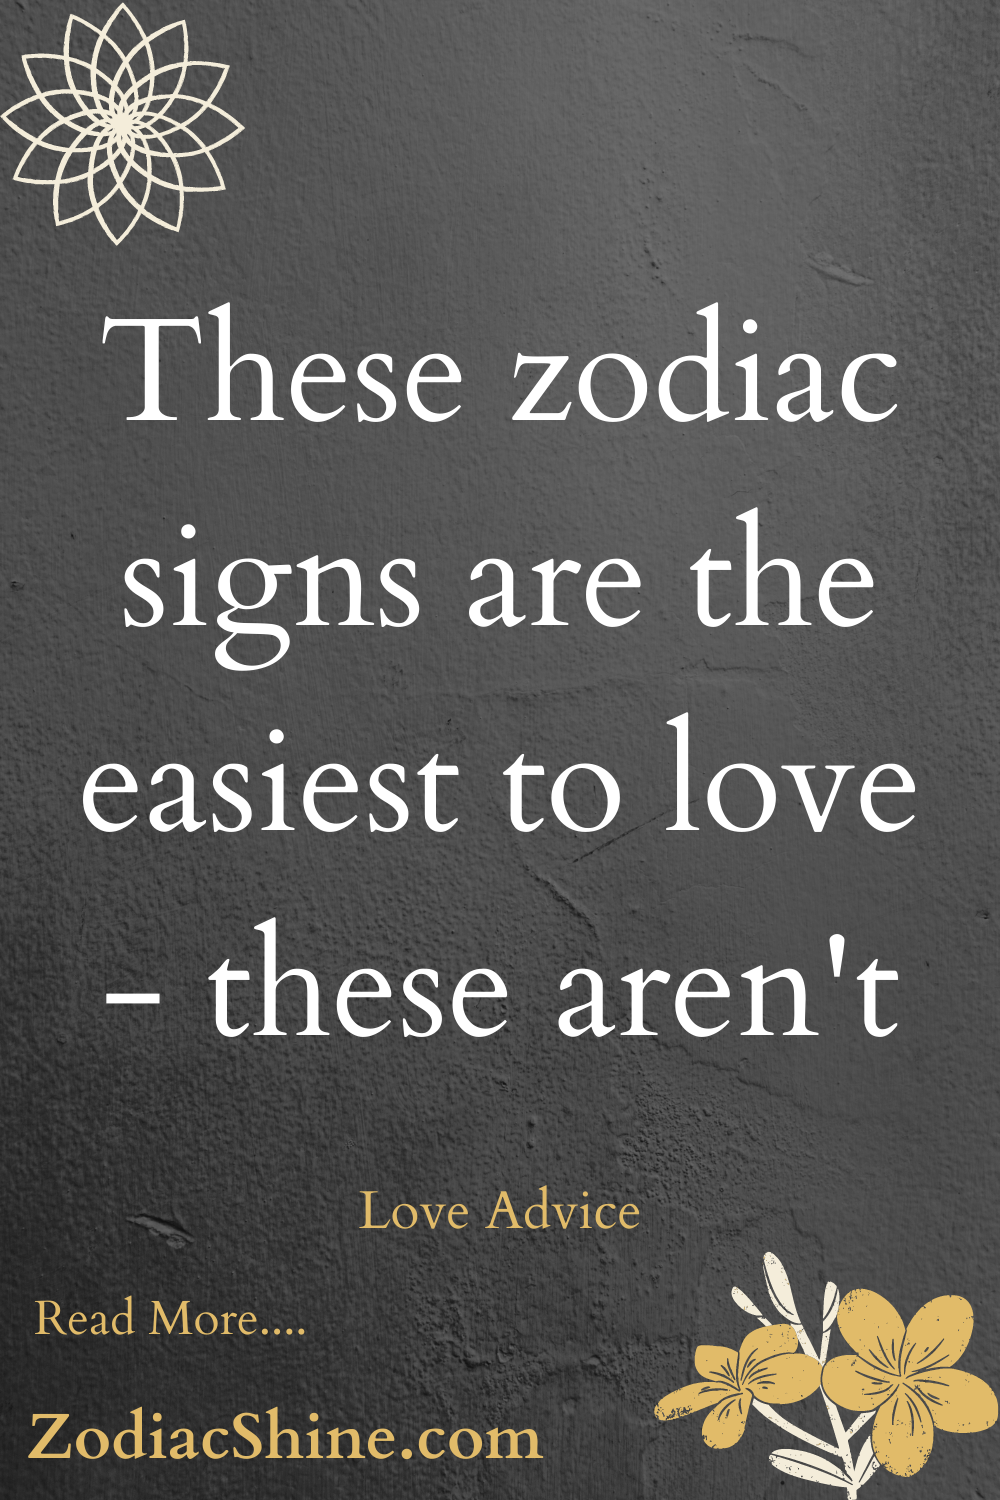 These zodiac signs are the easiest to love - these aren't